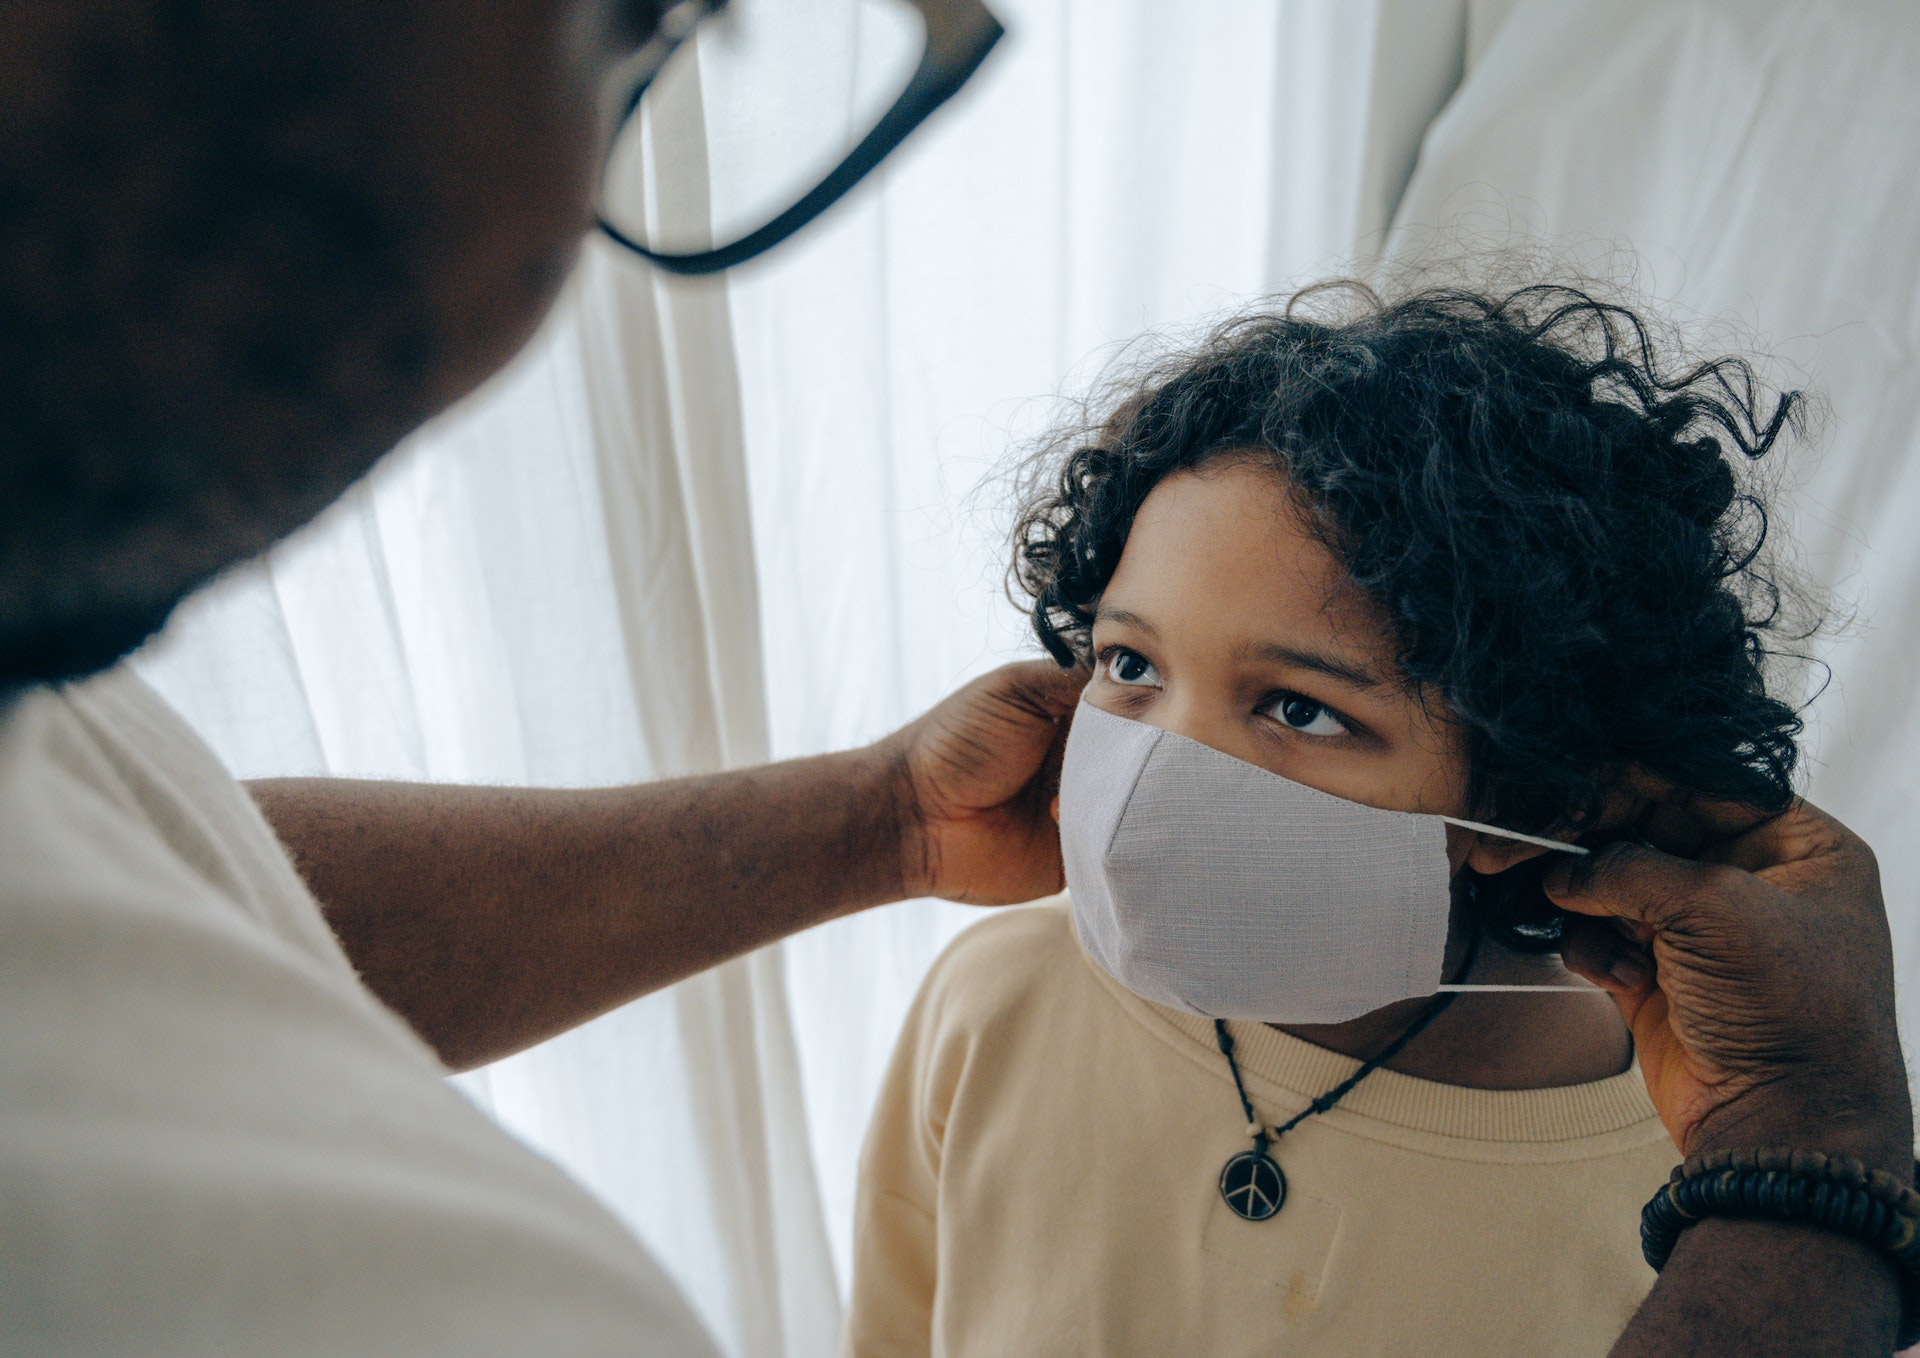 What Effect Has the Pandemic Had on Children’s Oral Health?